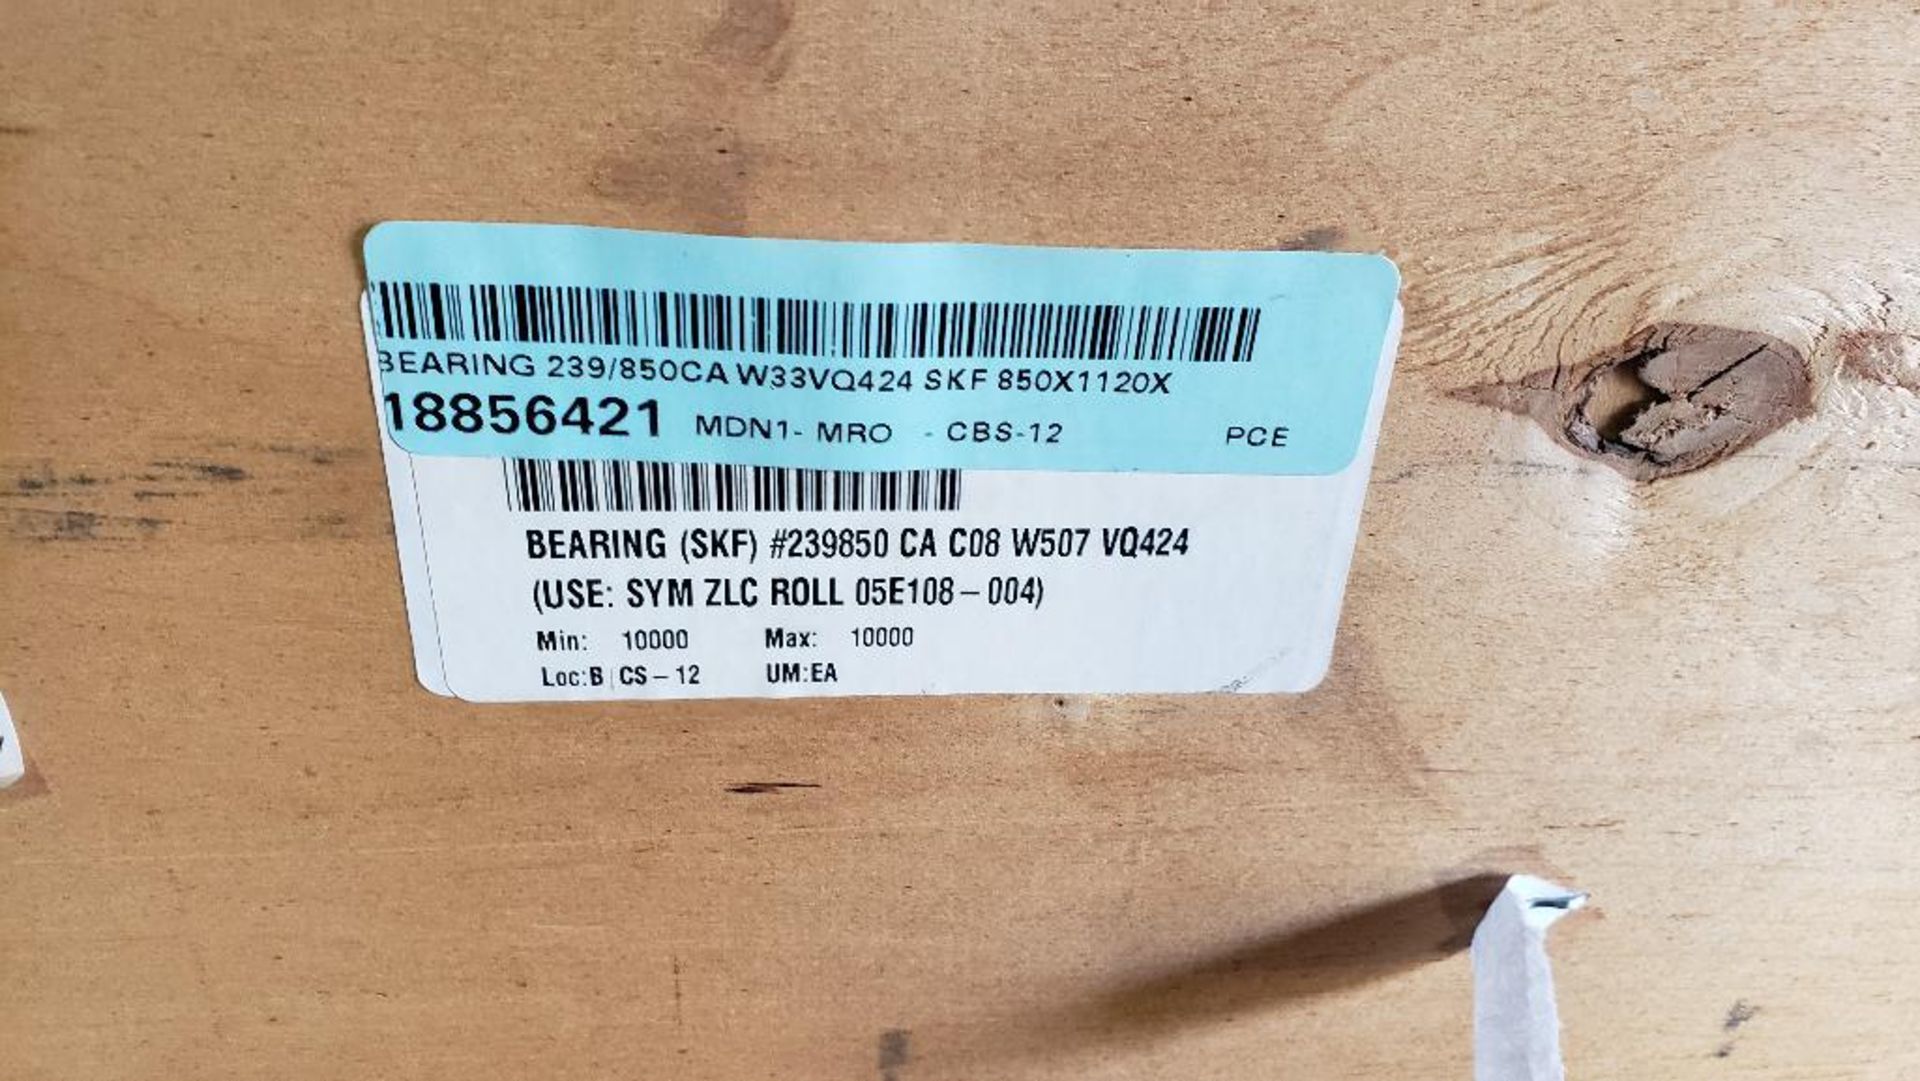 SKF super precision large capacity bearing. Part number 239/850 CA/W33VQ424. . New in crate. . - Image 5 of 6